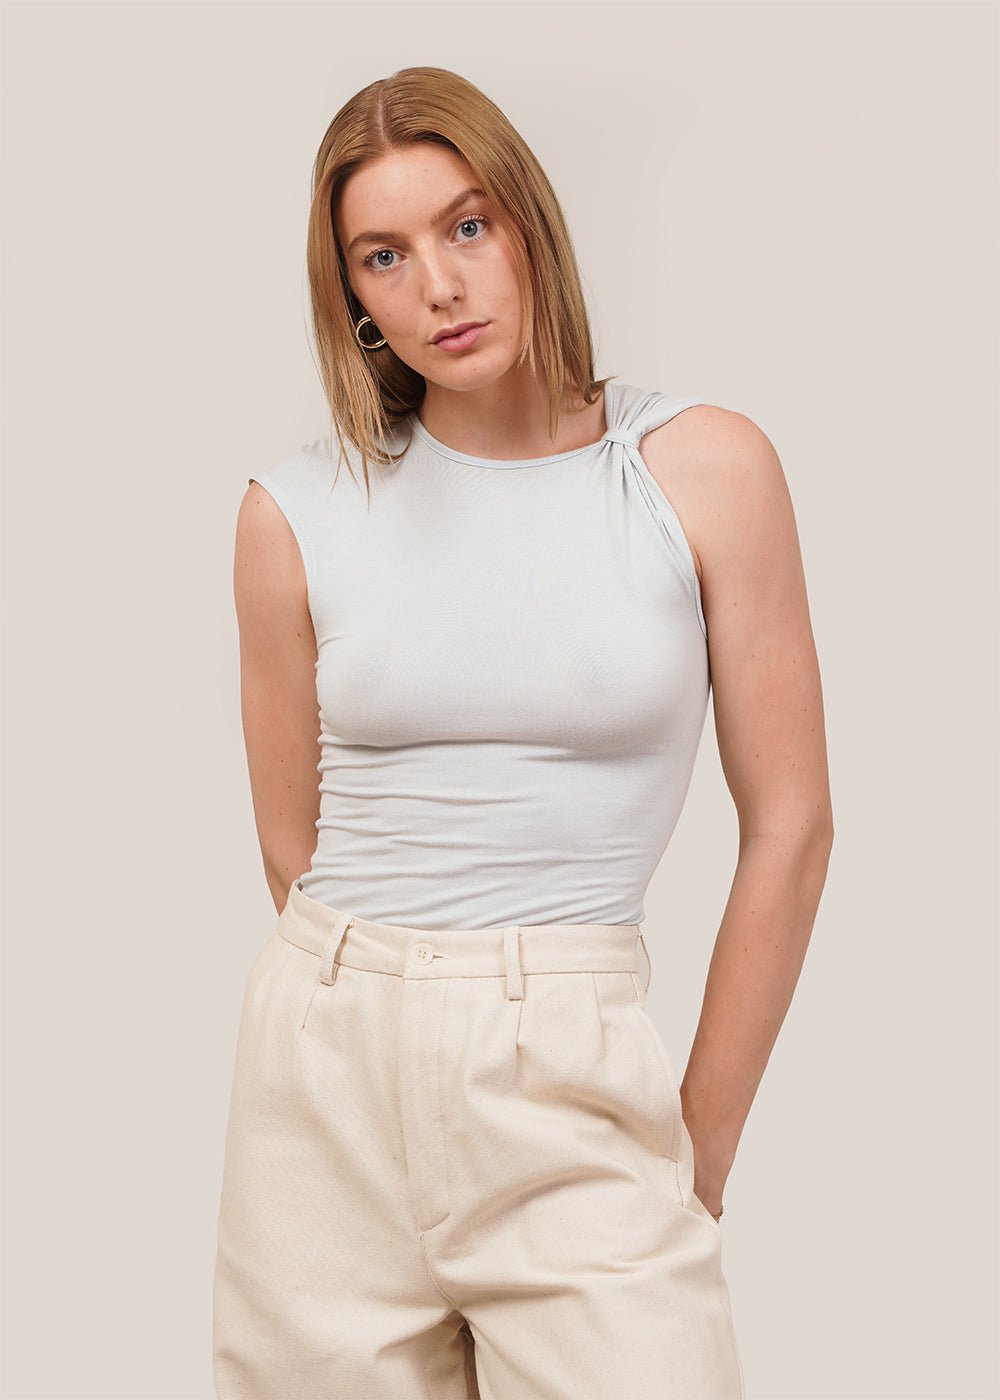 Geel Quicksilver Miro Top - New Classics Studios Sustainable Ethical Fashion Canada